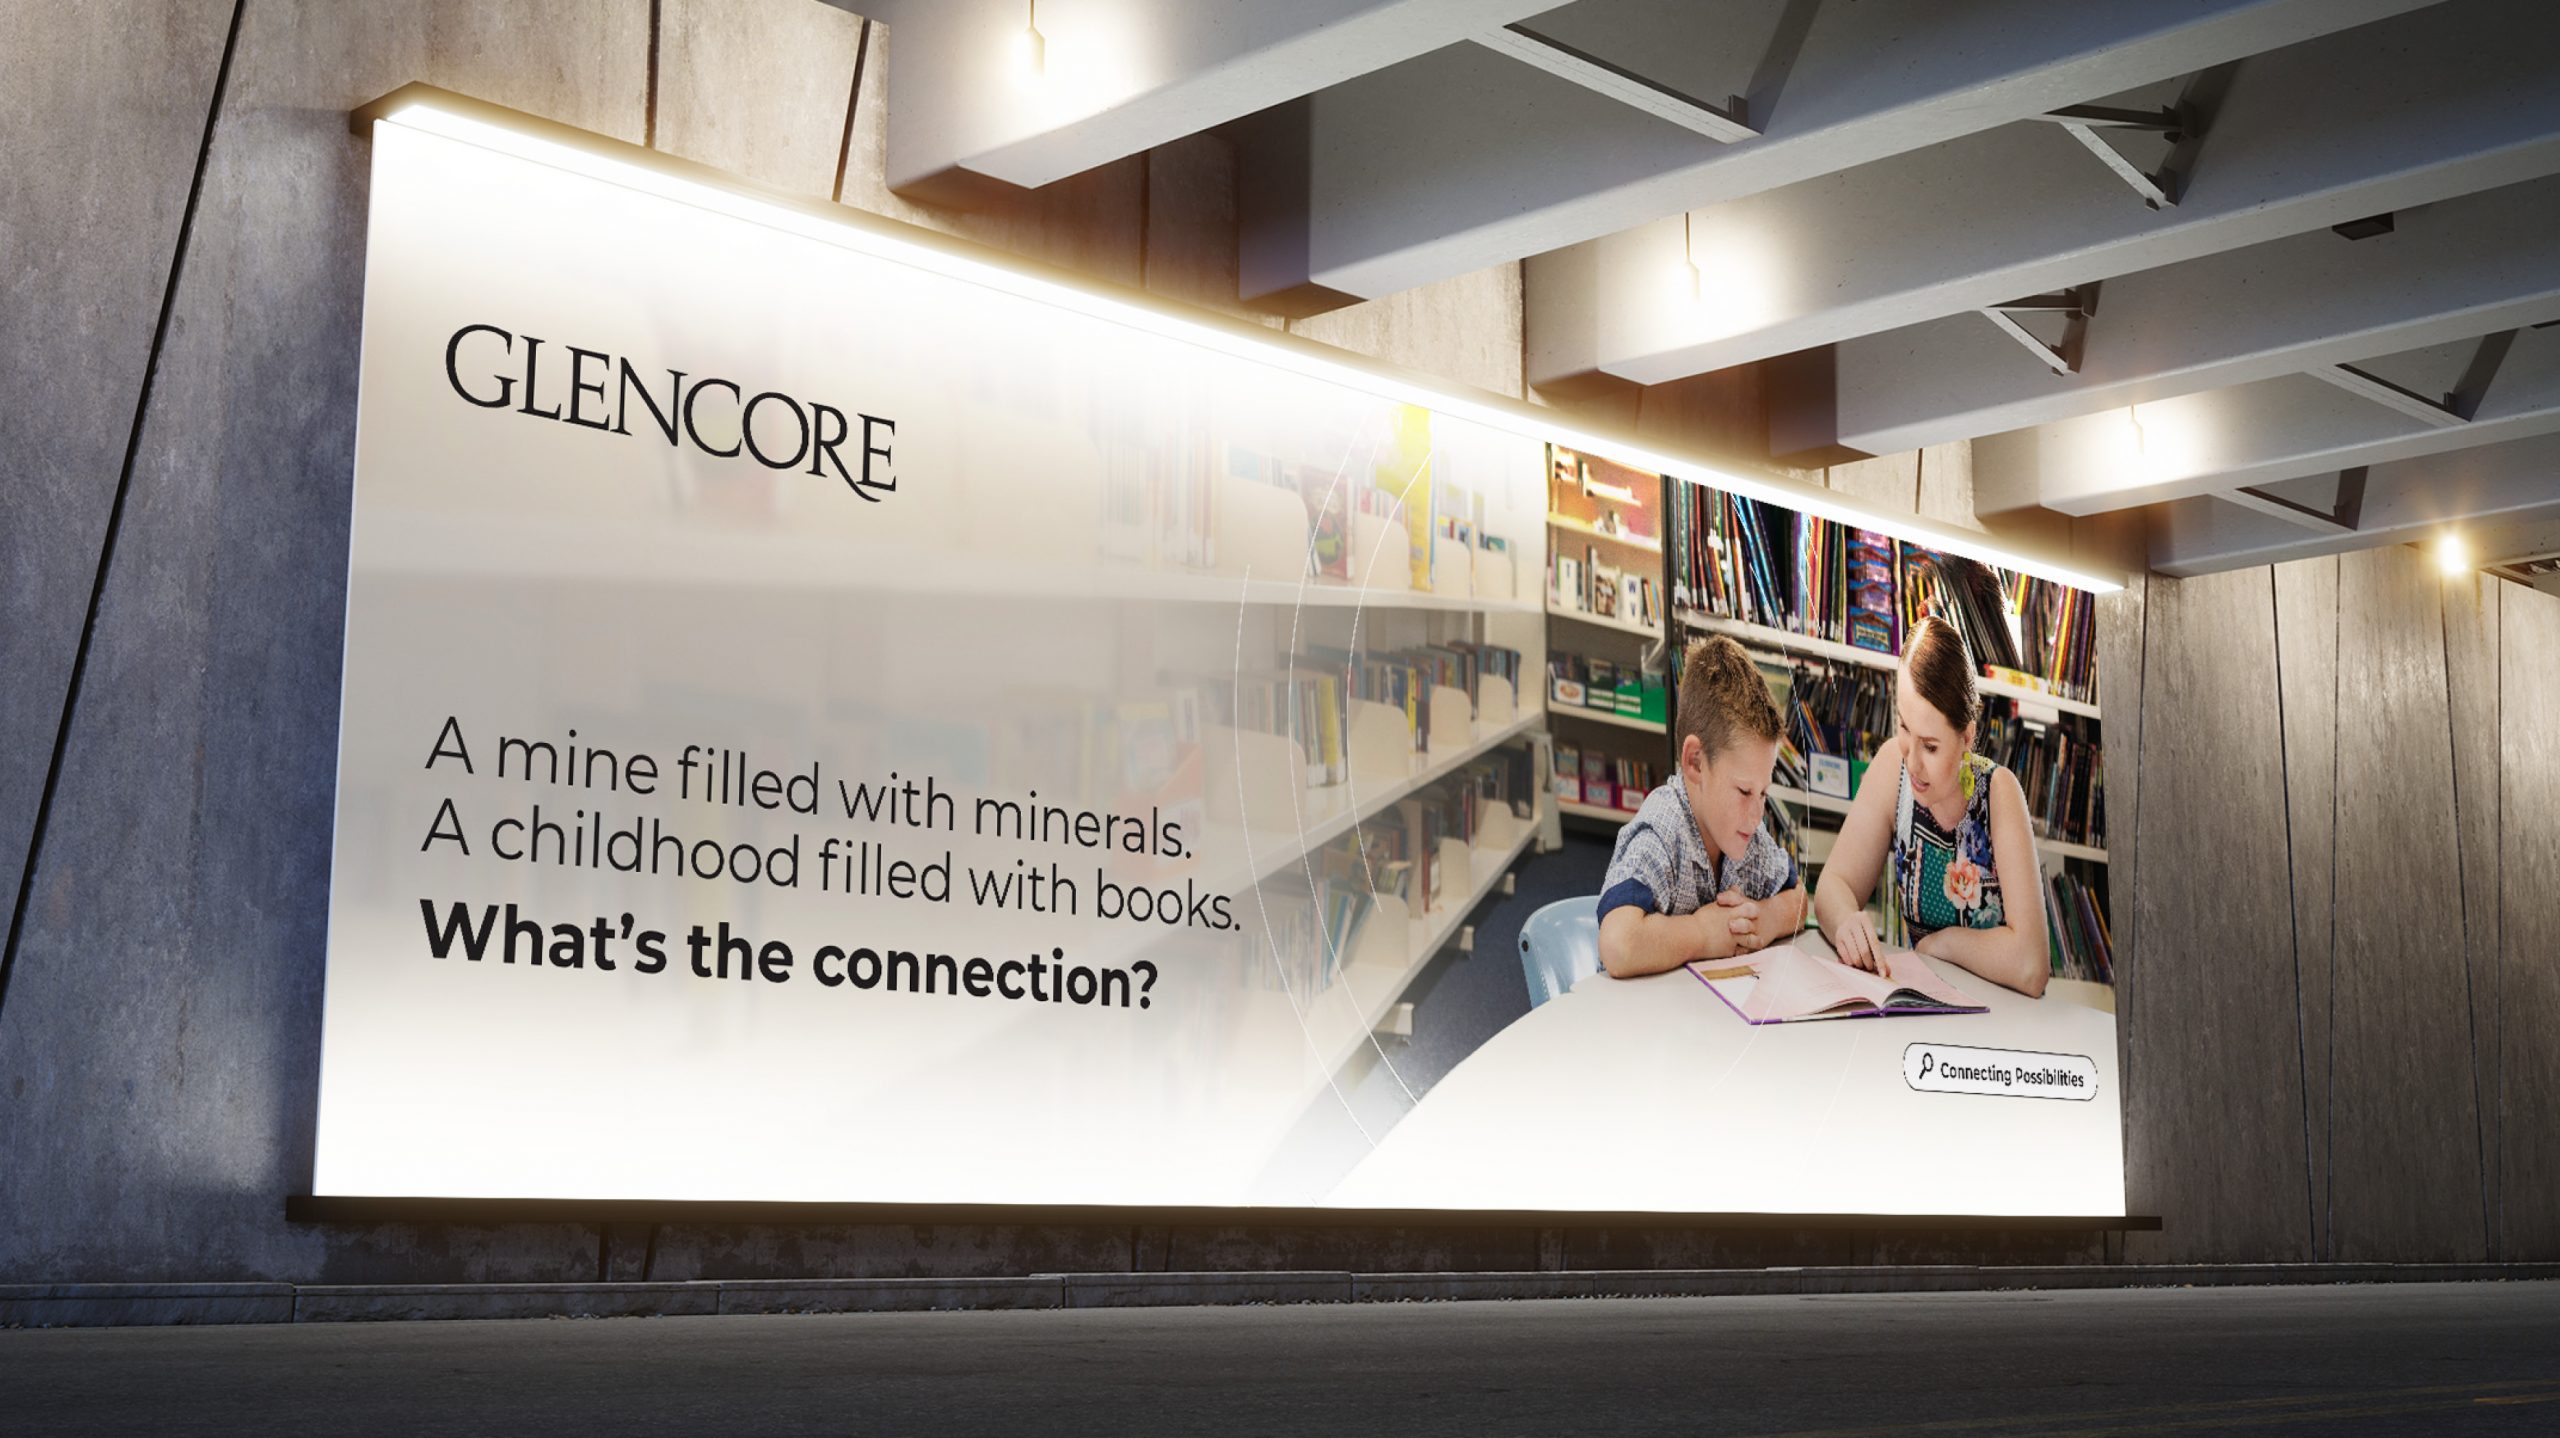 A billboard for the glencore advertising campaign with a woman and child sitting together in a library reading a book. The copy reads "a mine filled with minerals. A childhood filled with books. Whats the connection?"